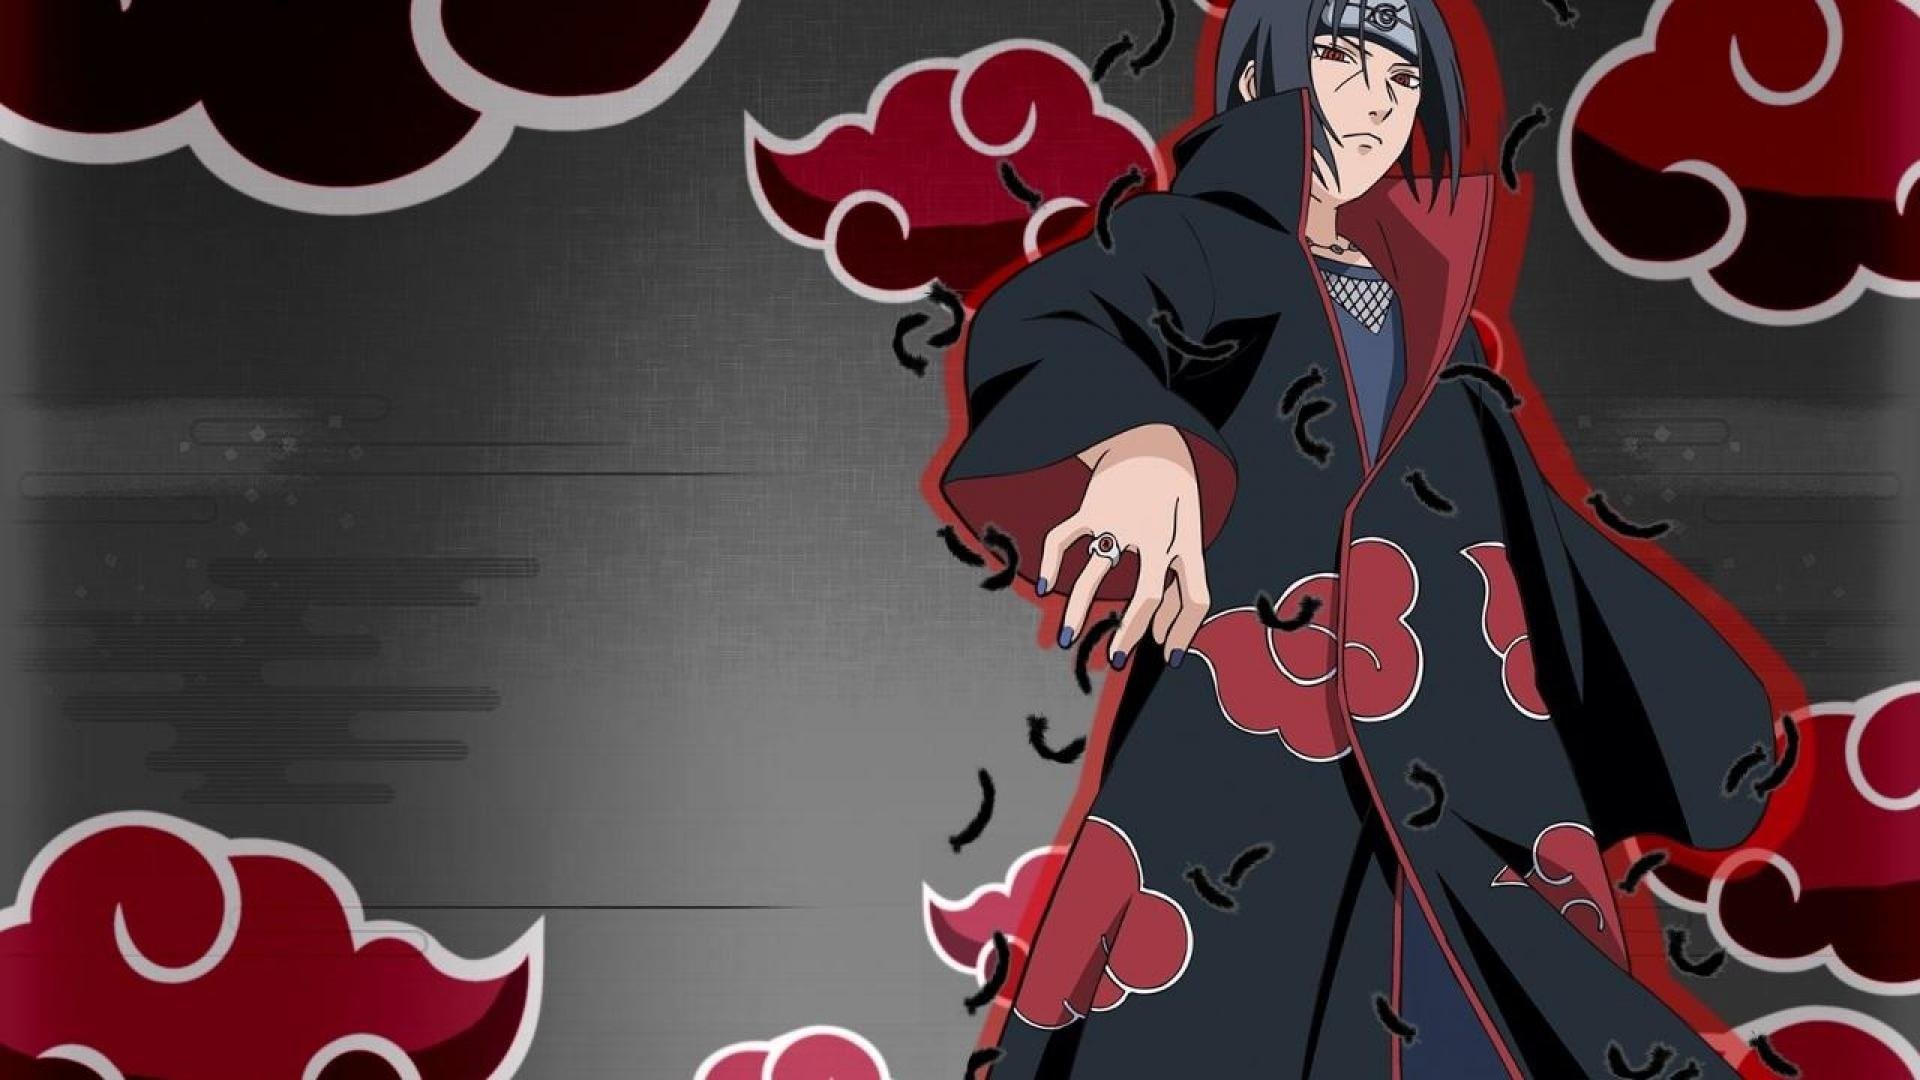 Search Results for “itachi uchiha wallpaper pack” – Adorable Wallpapers